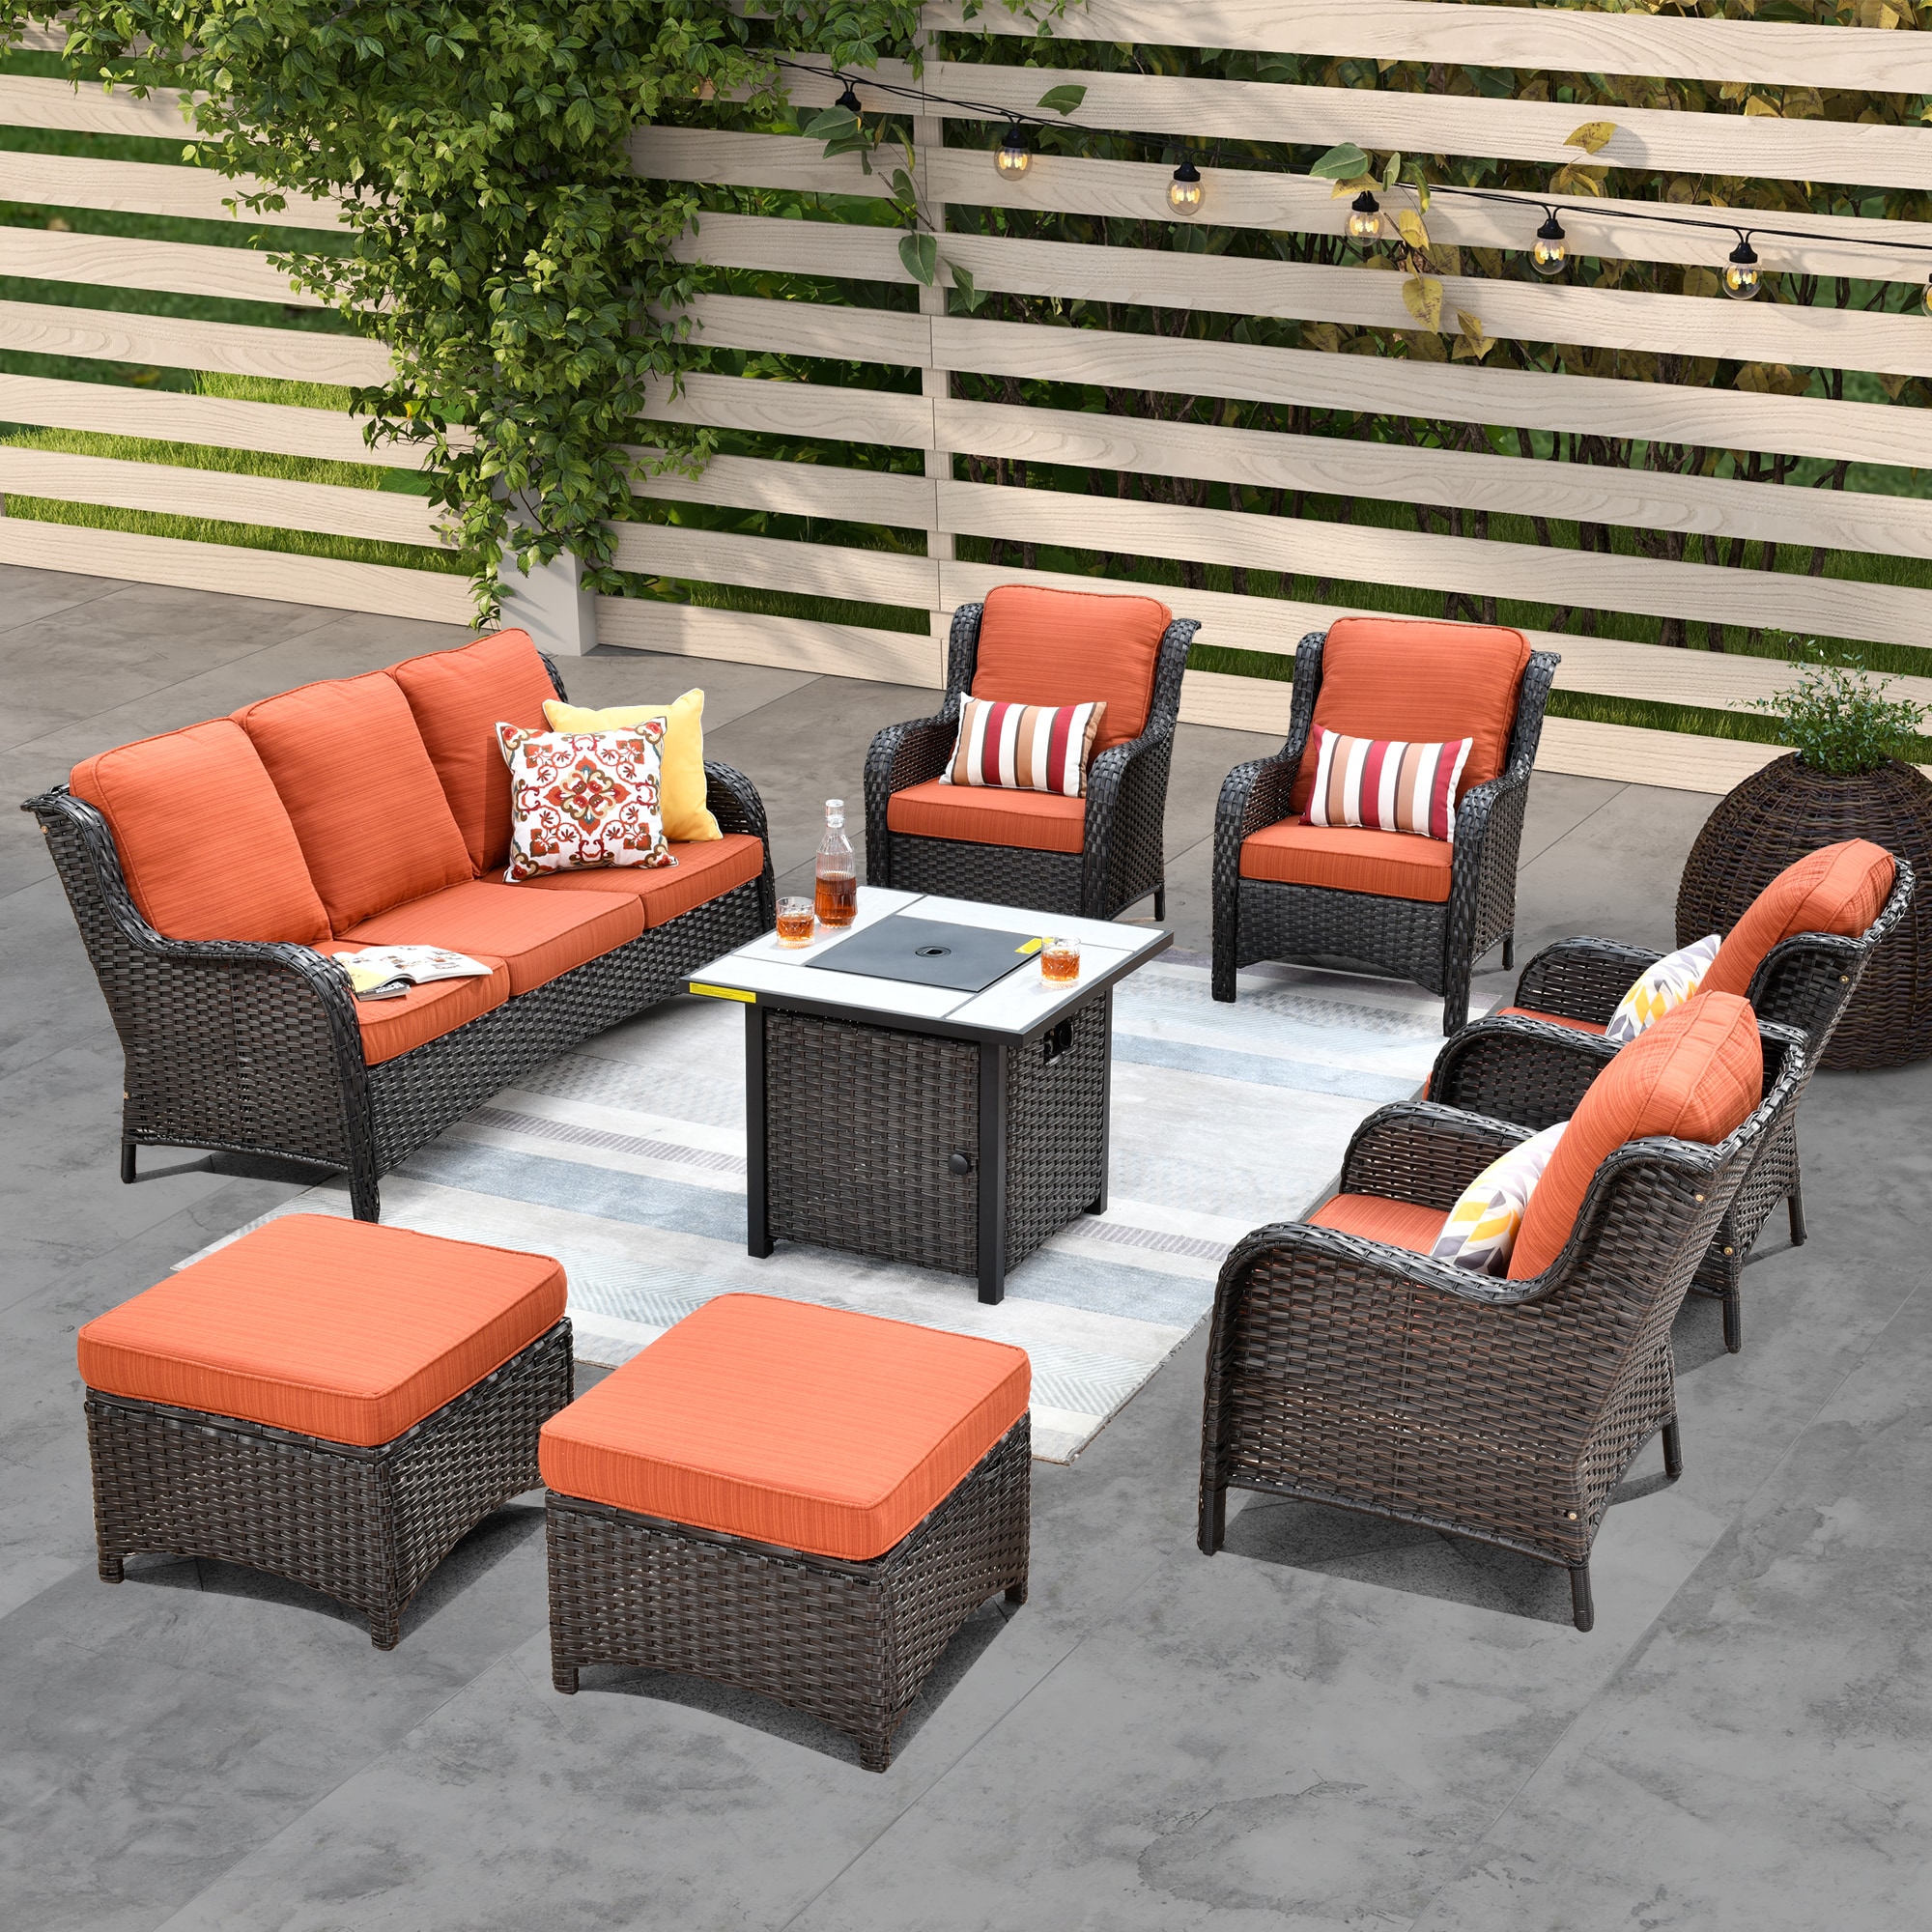 ovios 8 piece patio furniture sets rattan wicker chair sectional